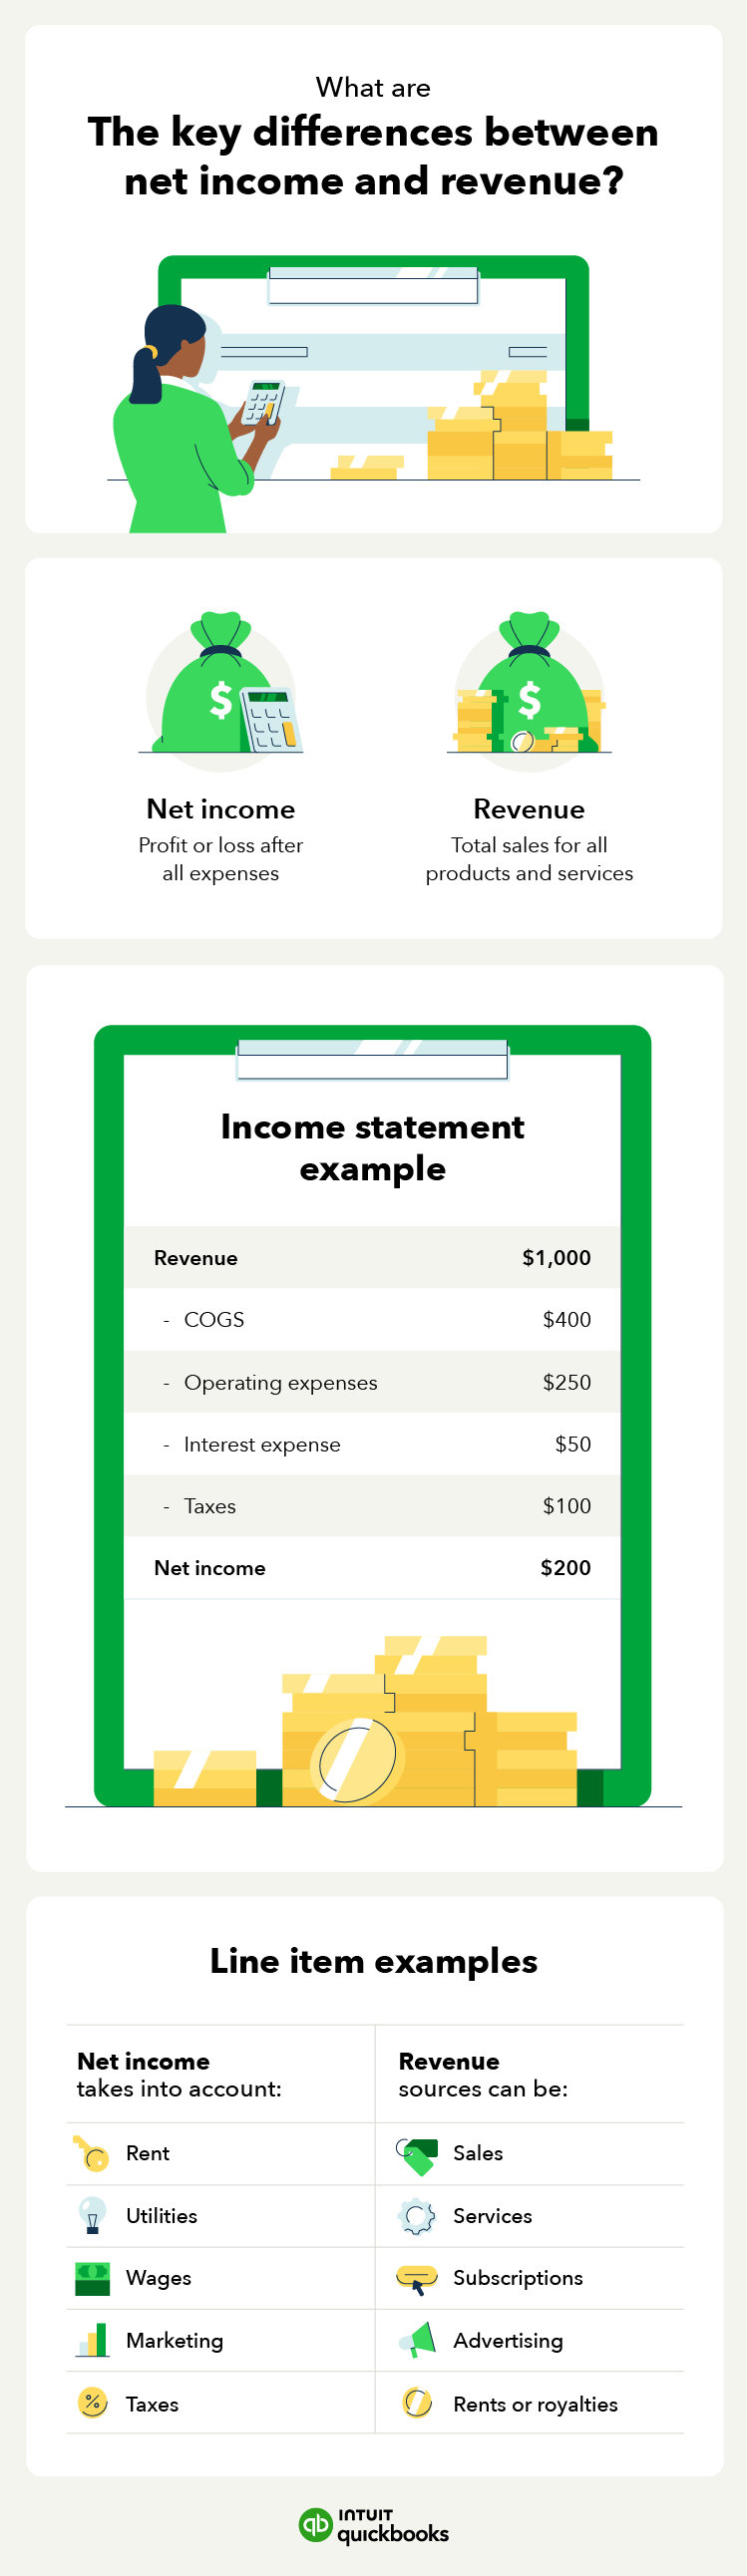 An infographic of the key differences between net income and revenue, including an income statement example.